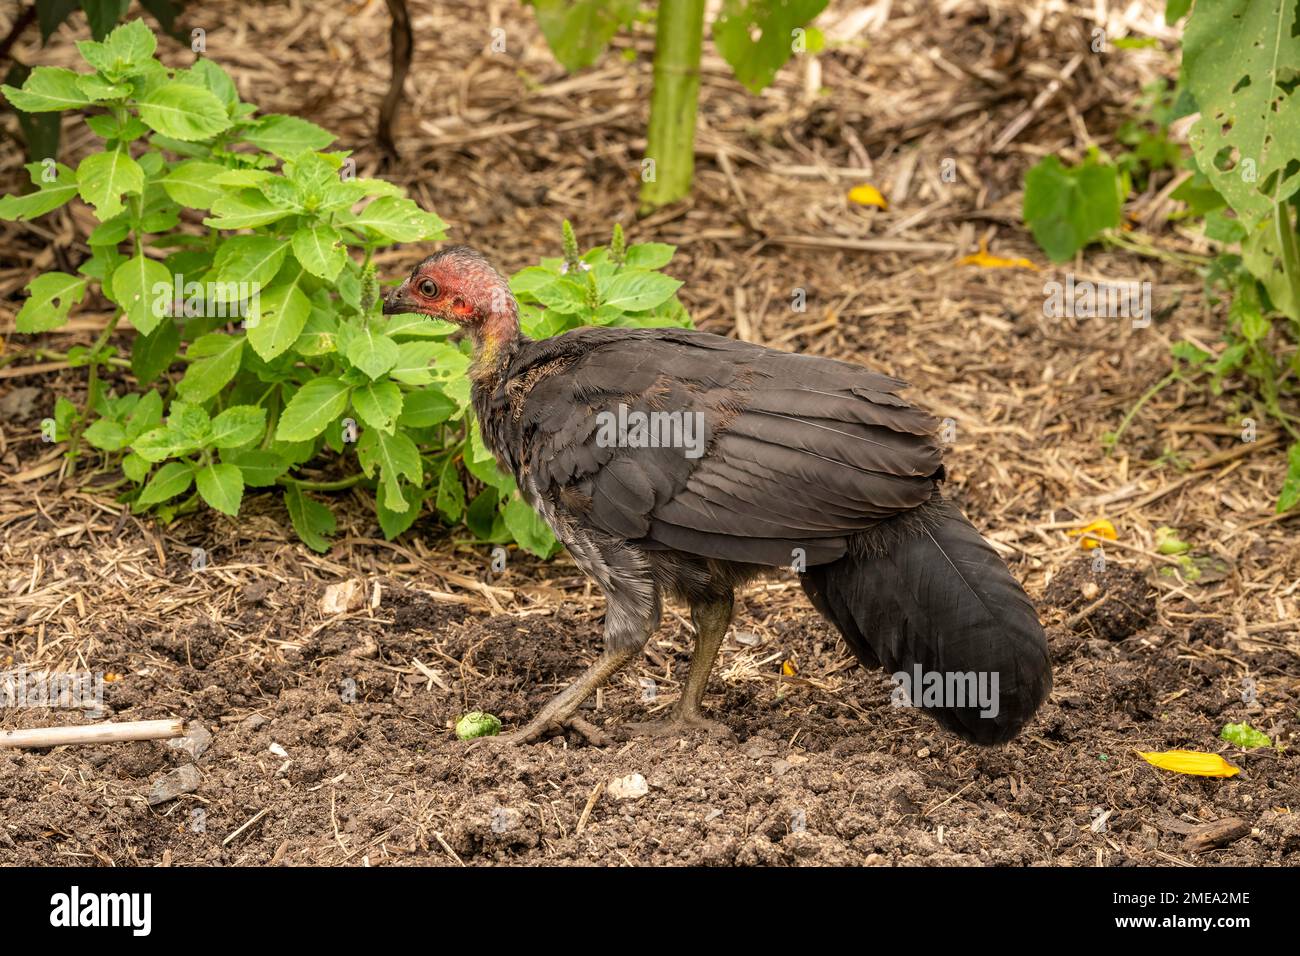 Bush Turkey chick helping to cultivate the ground at the Botanic Gardens in Brisbane, Queensland Stock Photo